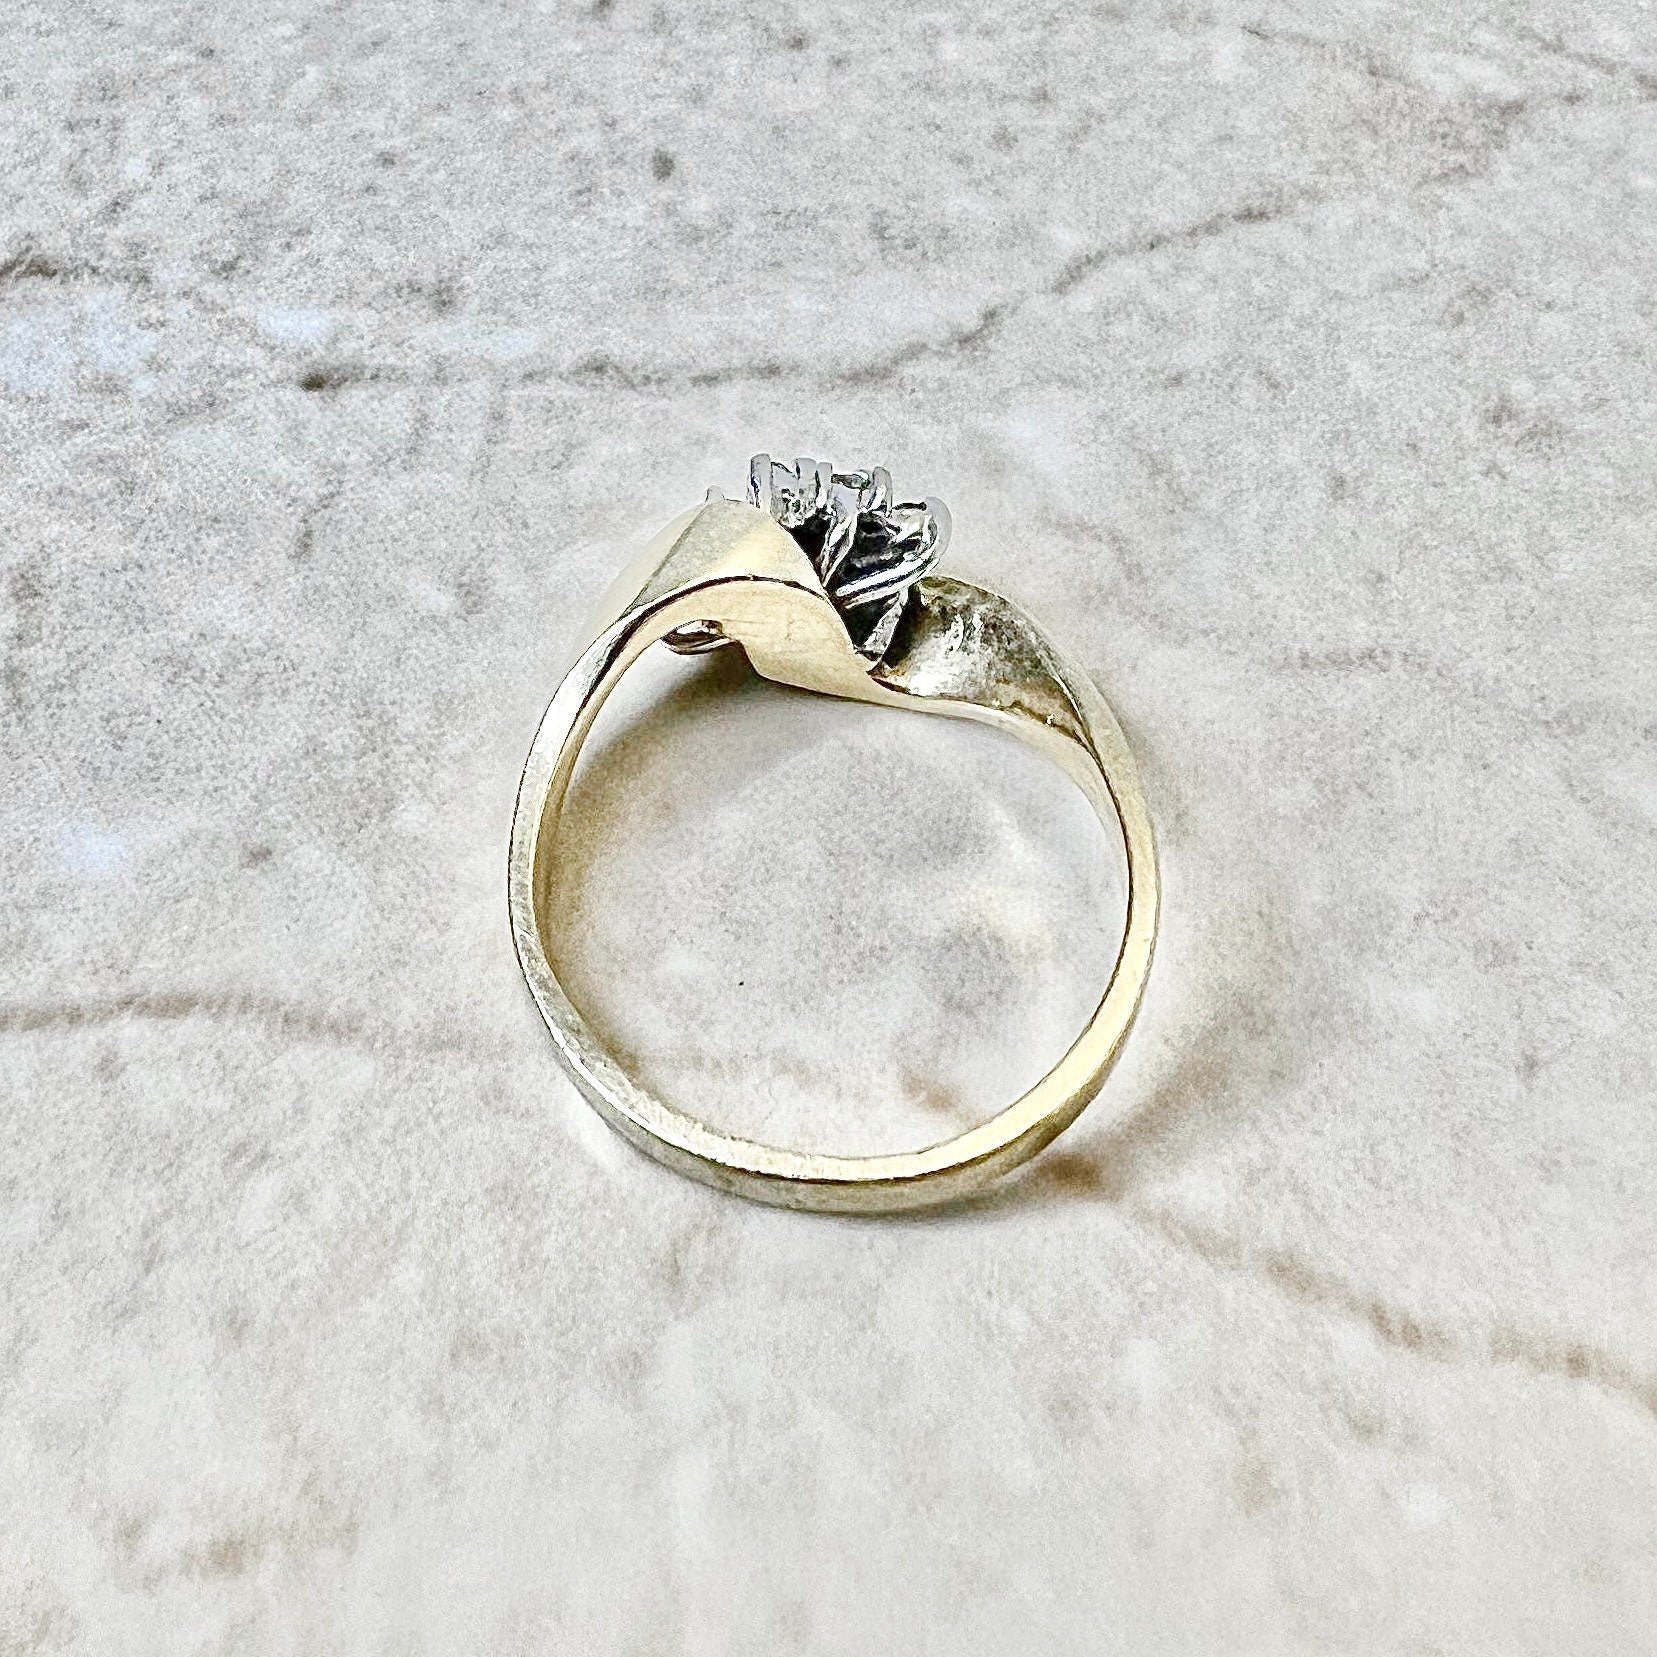 Vintage 14K Diamond Cluster Ring - Yellow & White Gold Diamond Cocktail Ring - Anniversary Ring - Best Birthday Gift For Her - Jewelry Sale